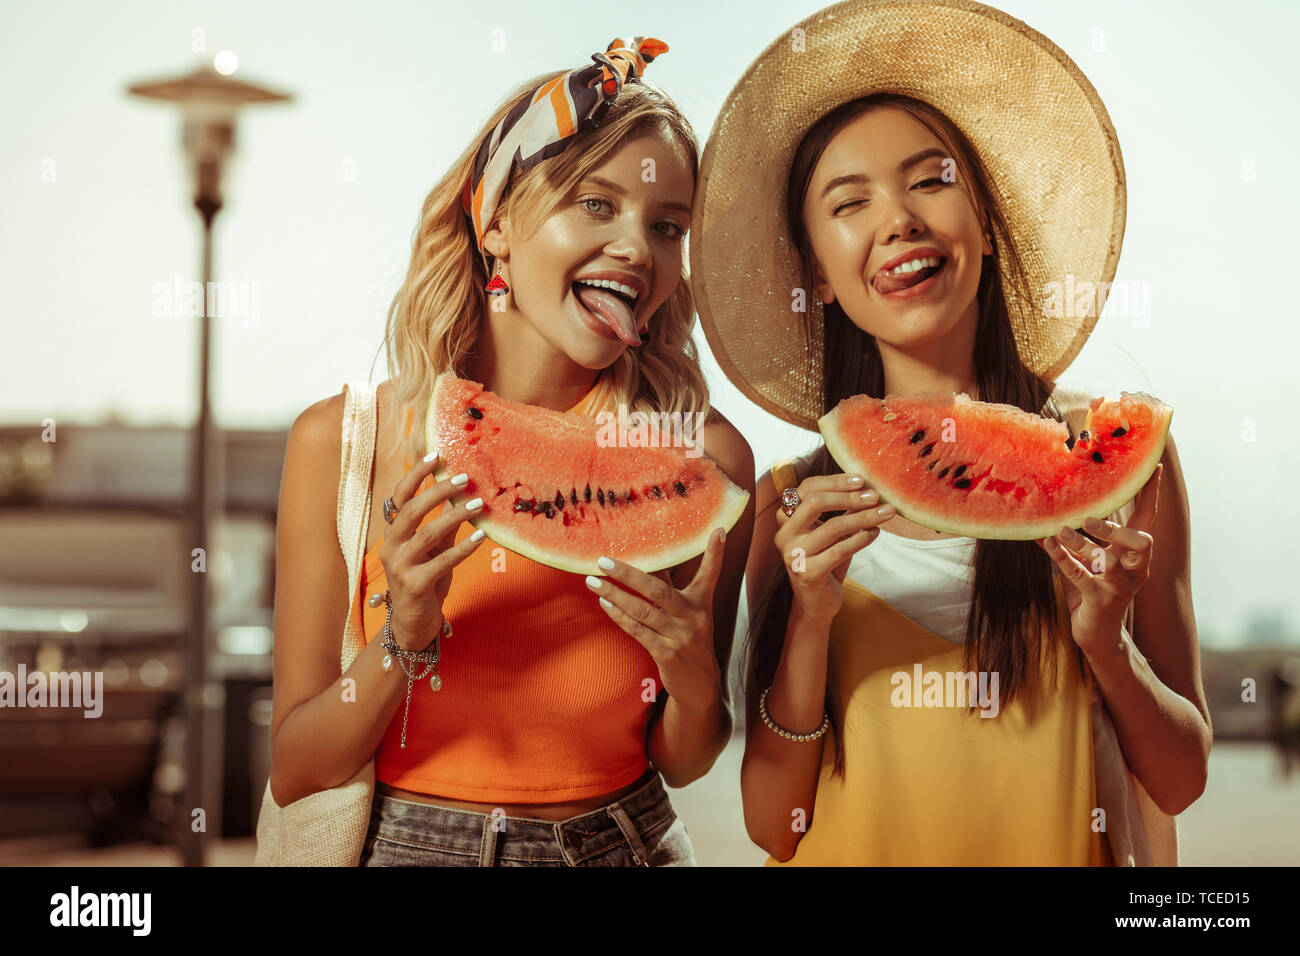 Women with watermelon pieces. Face-portrait of beautiful lovely alluring beaming radiant glowing bewitching girlfriends in early 20s keeping watermelo Stock Photo